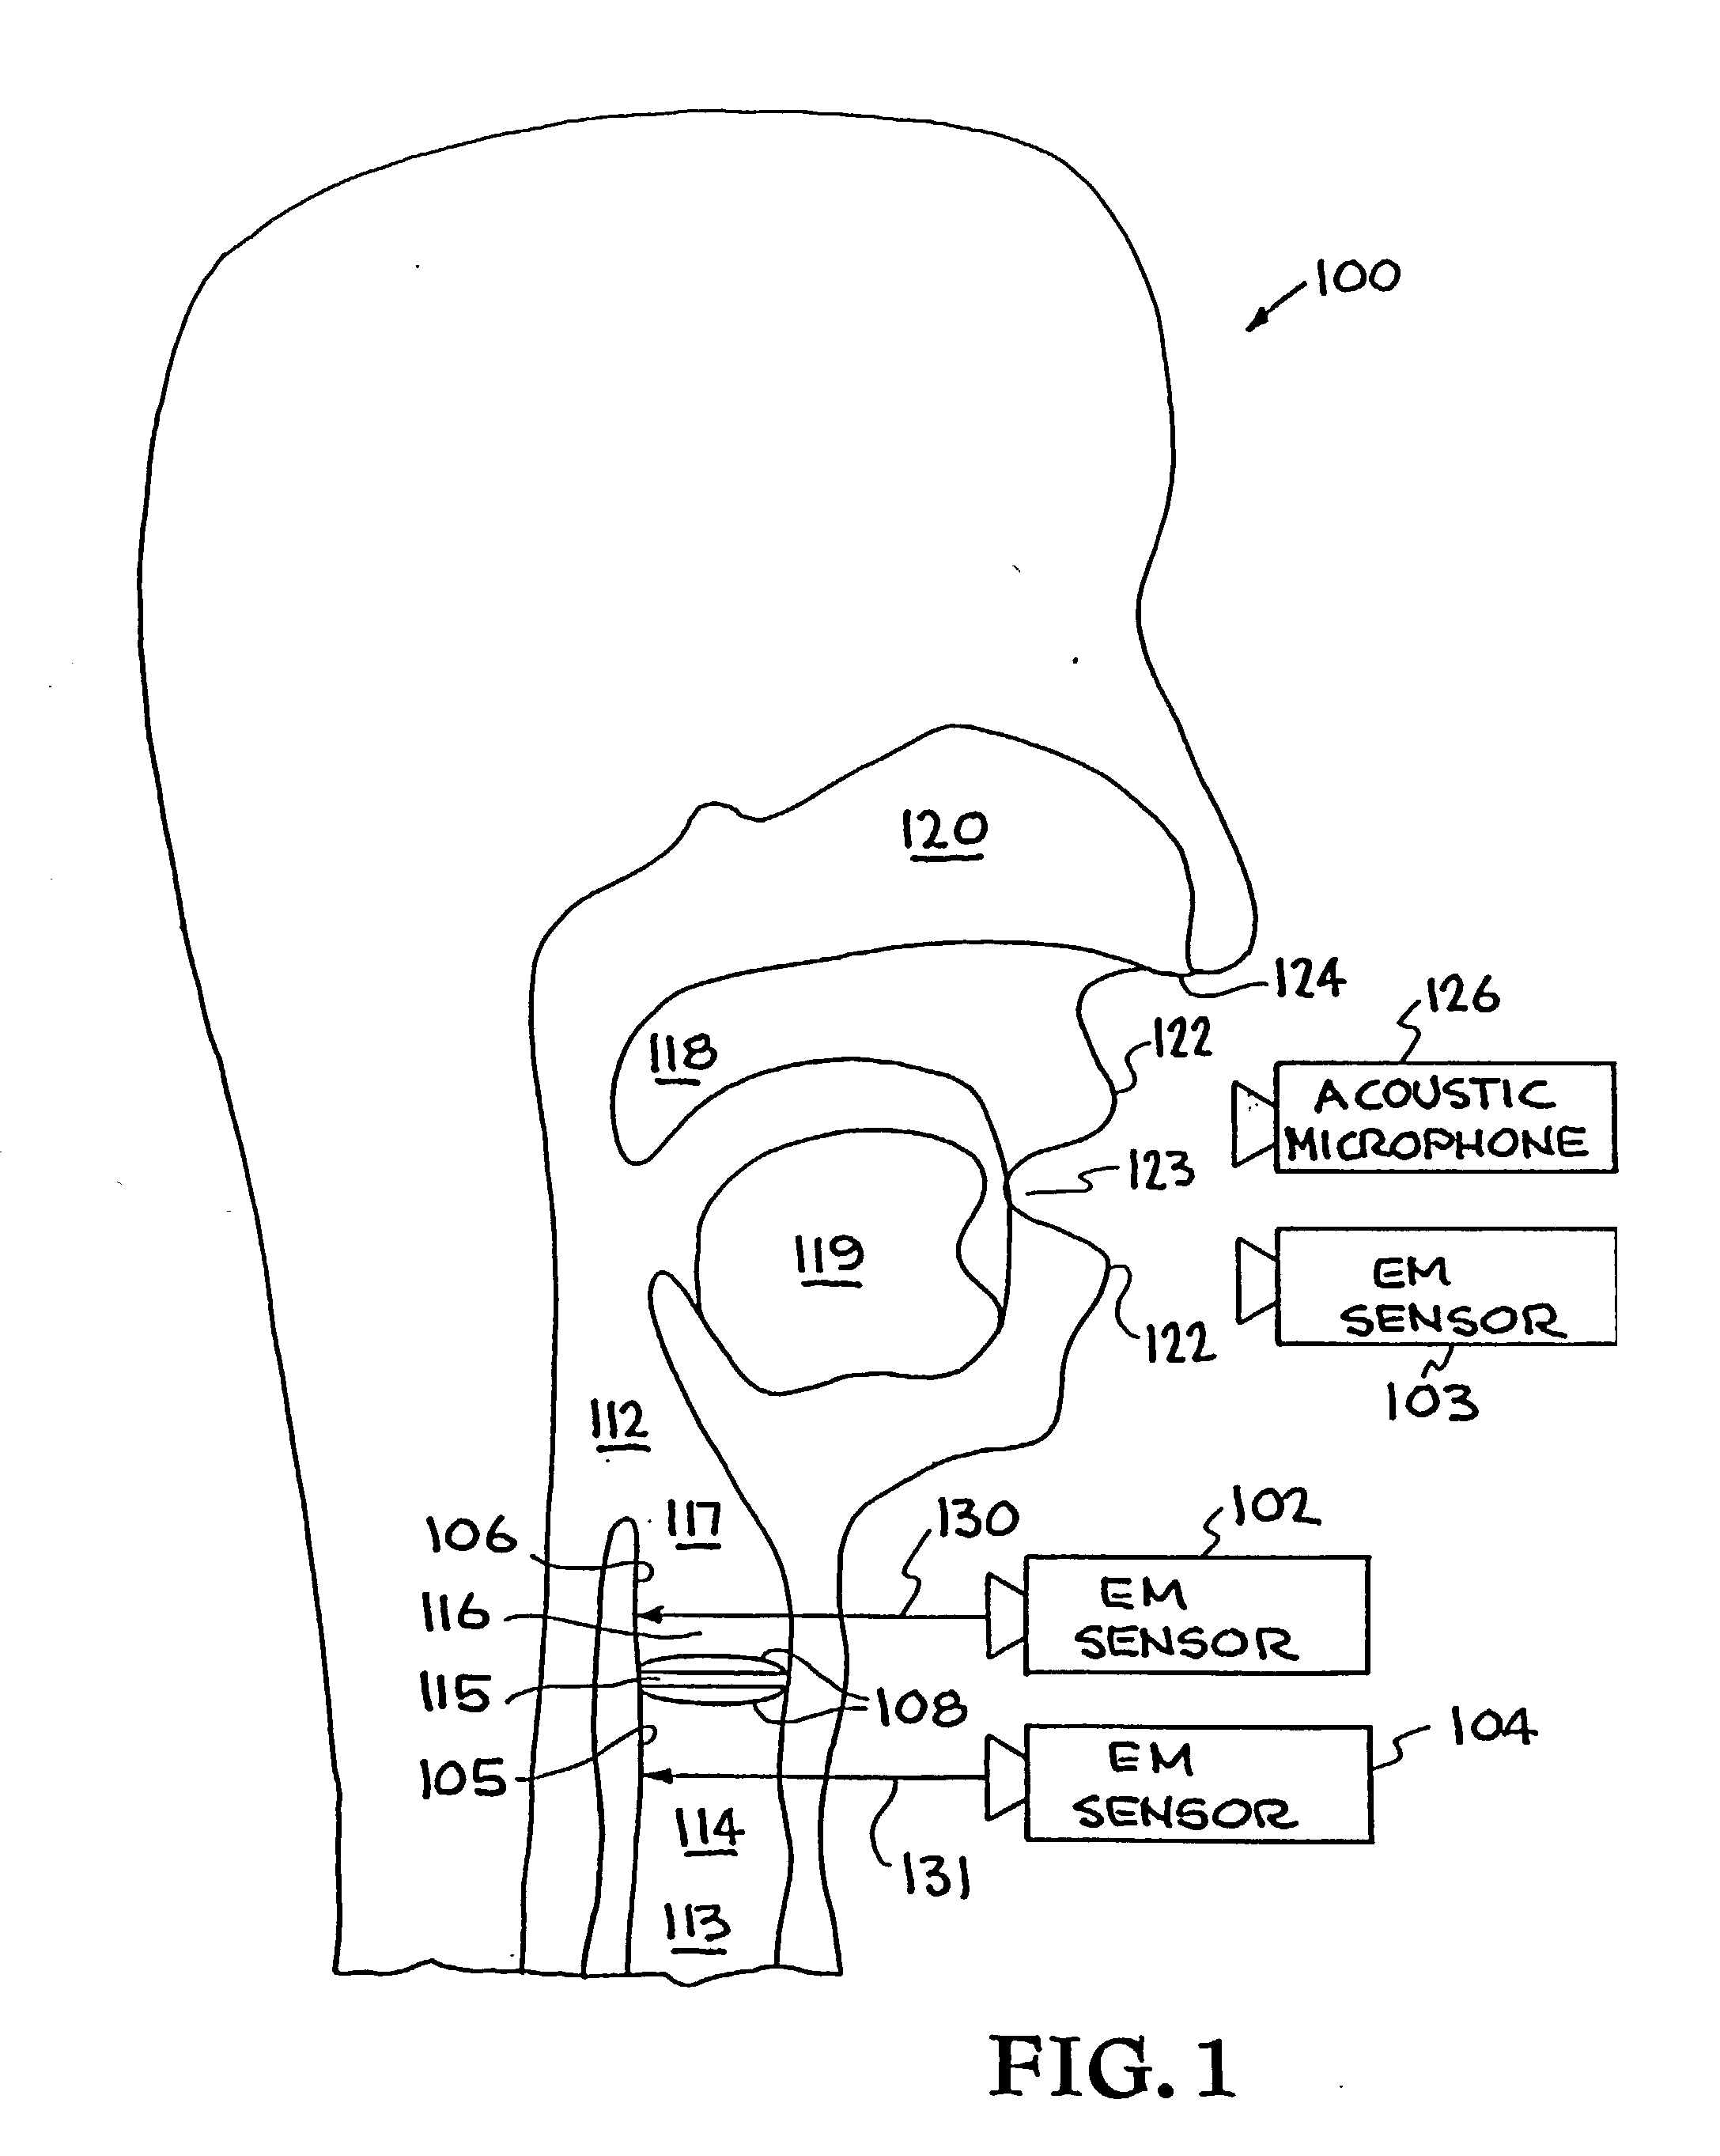 System and method for characterizing voiced excitations of speech and acoustic signals, removing acoustic noise from speech, and synthesizing speech